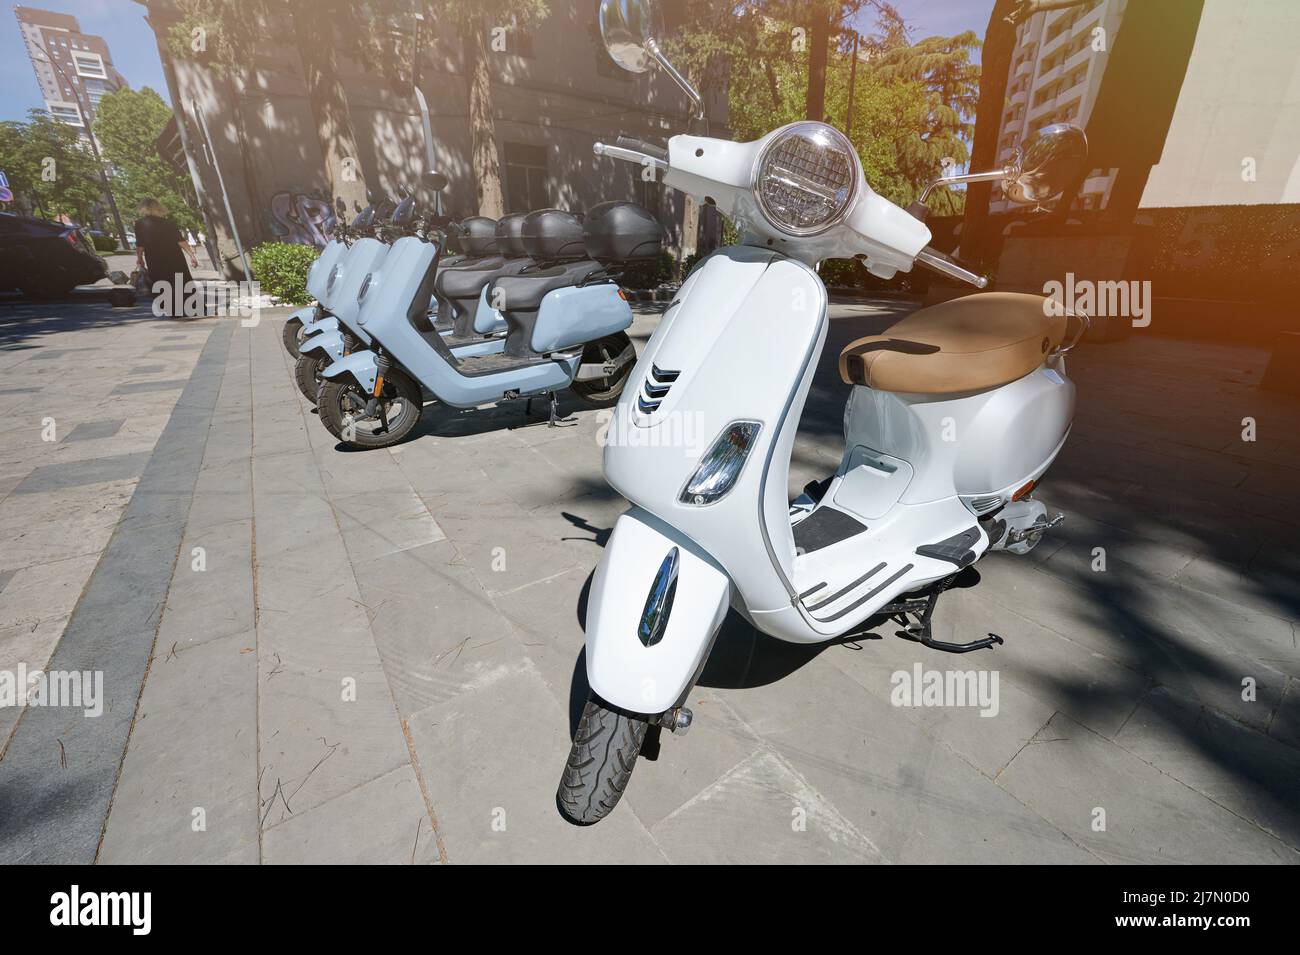 Moto scooters park in city street for rent on bright sunny day Stock Photo